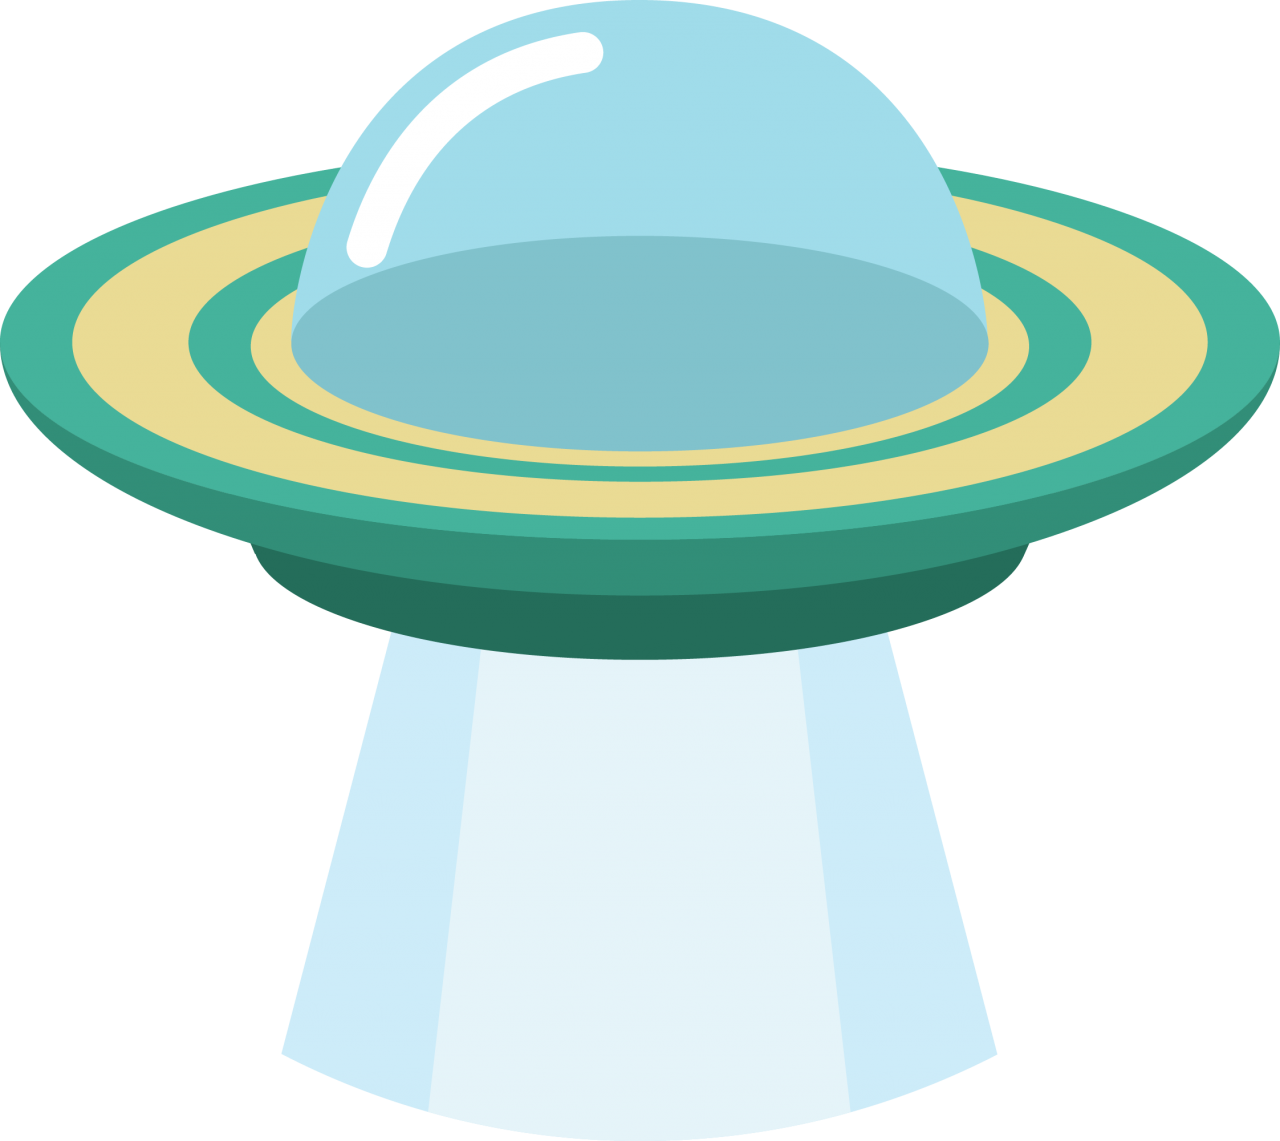 Ufo Clipart PNG Image.